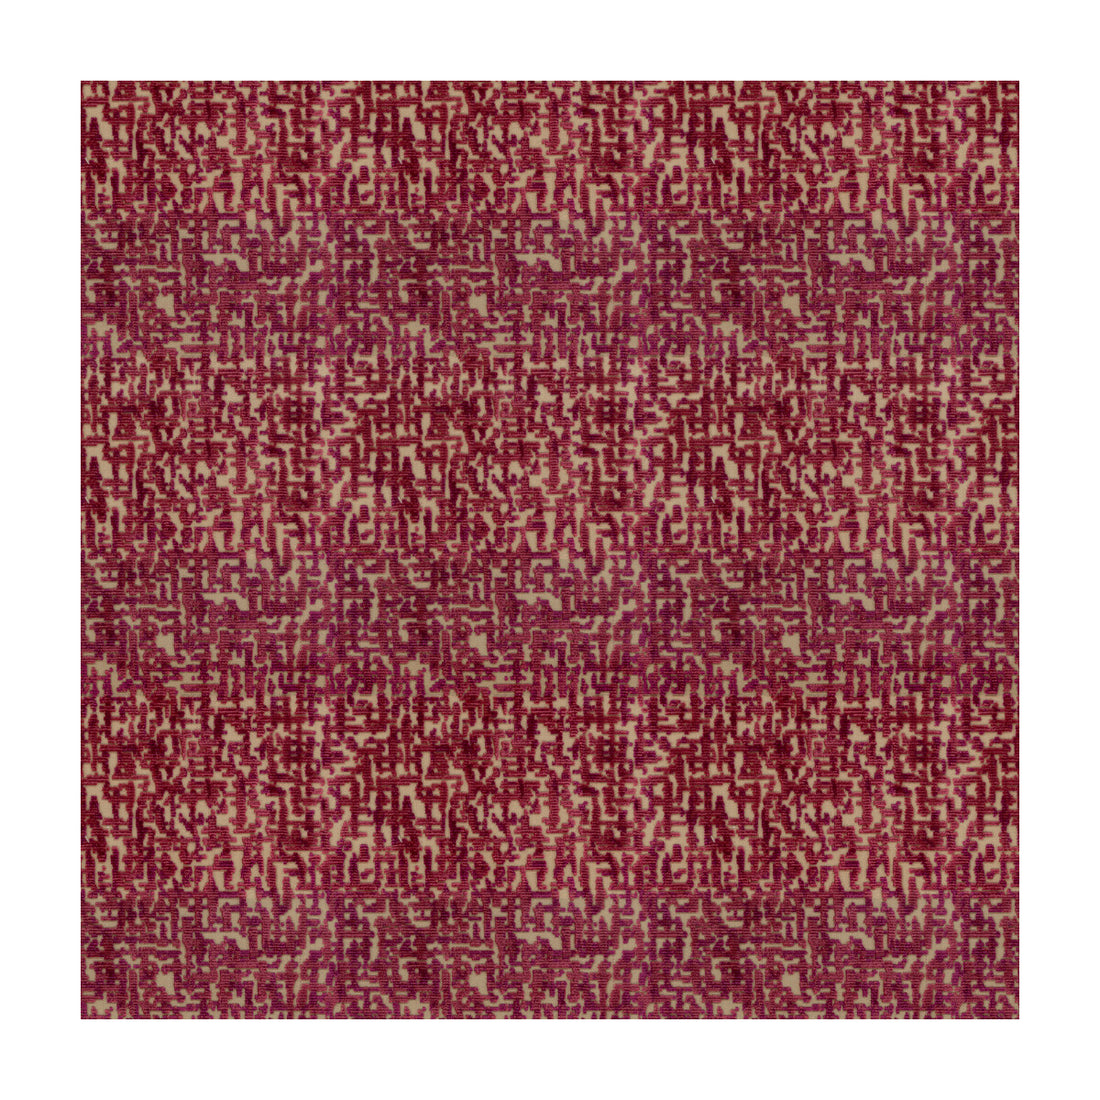 Aillard fabric in red color - pattern 8015131.19.0 - by Brunschwig &amp; Fils in the L&